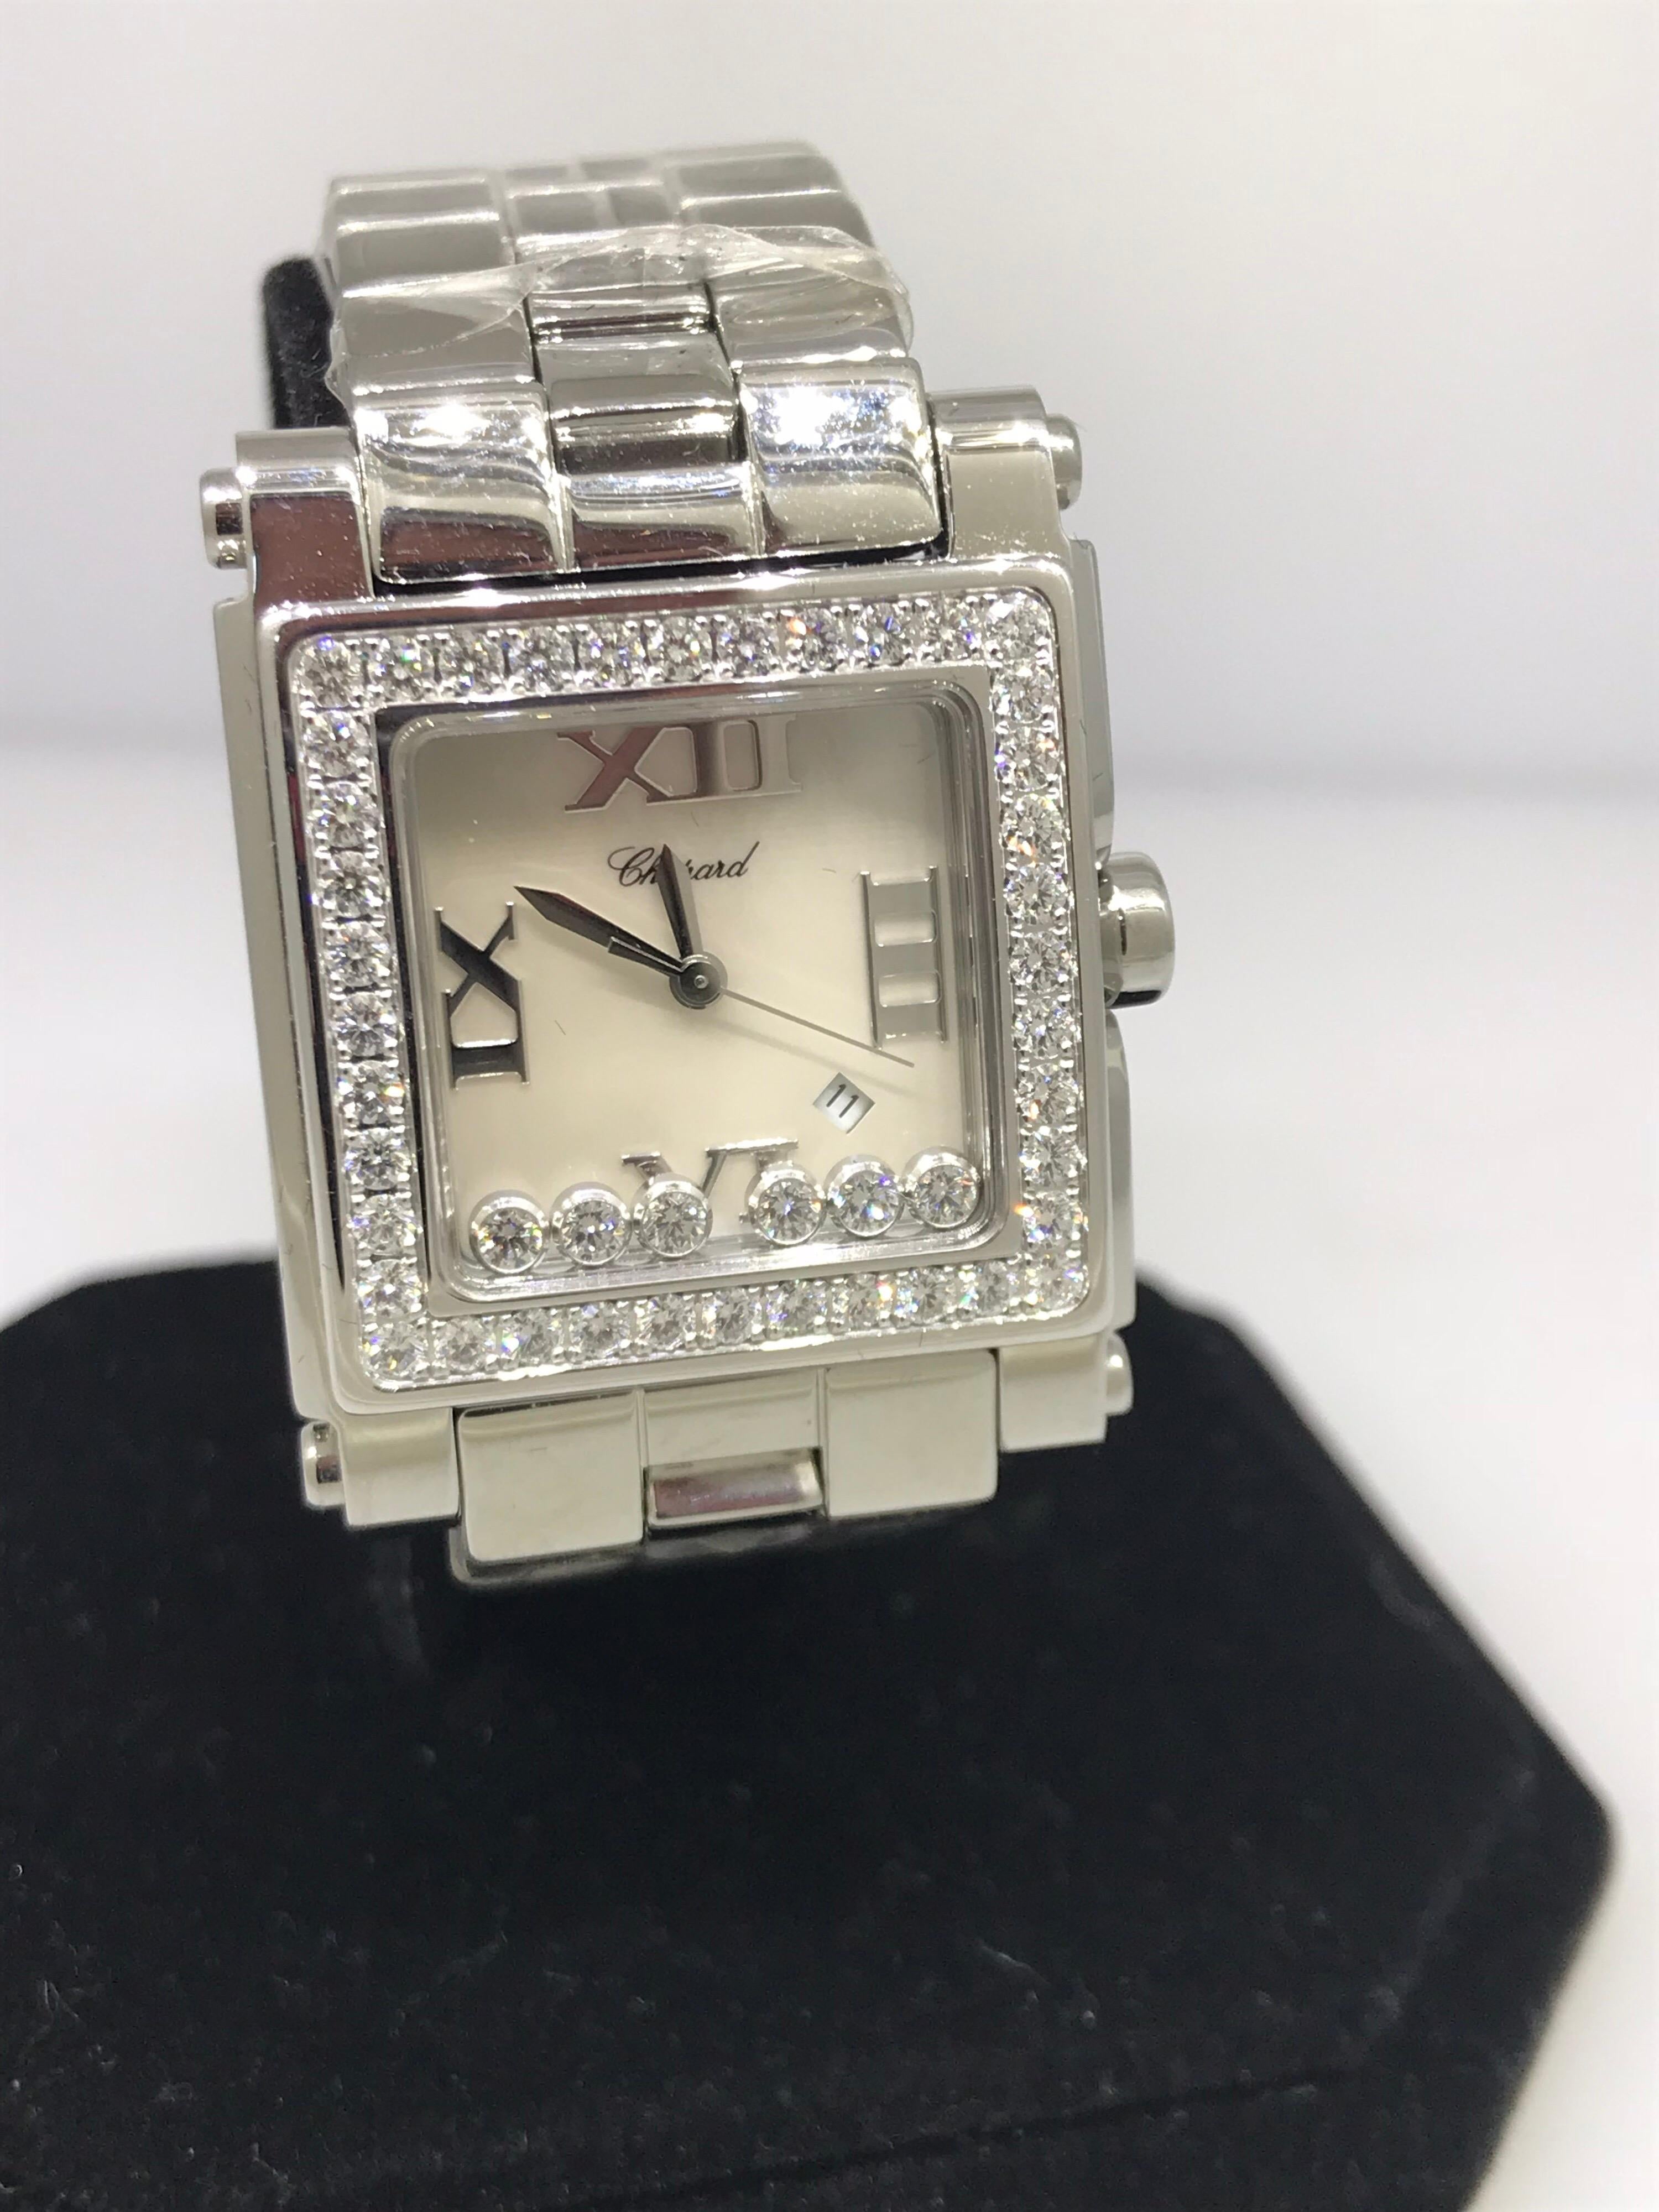 Chopard Happy Sport Square Ladies Watch

Model Number: 27/8505-2001

100% Authentic

Brand New

Comes with original Chopard Box, Certificate of Authenticity and Warranty, and Instruction Manual

Stainless Steel Case & Bracelet

Diamond Bezel (1.20